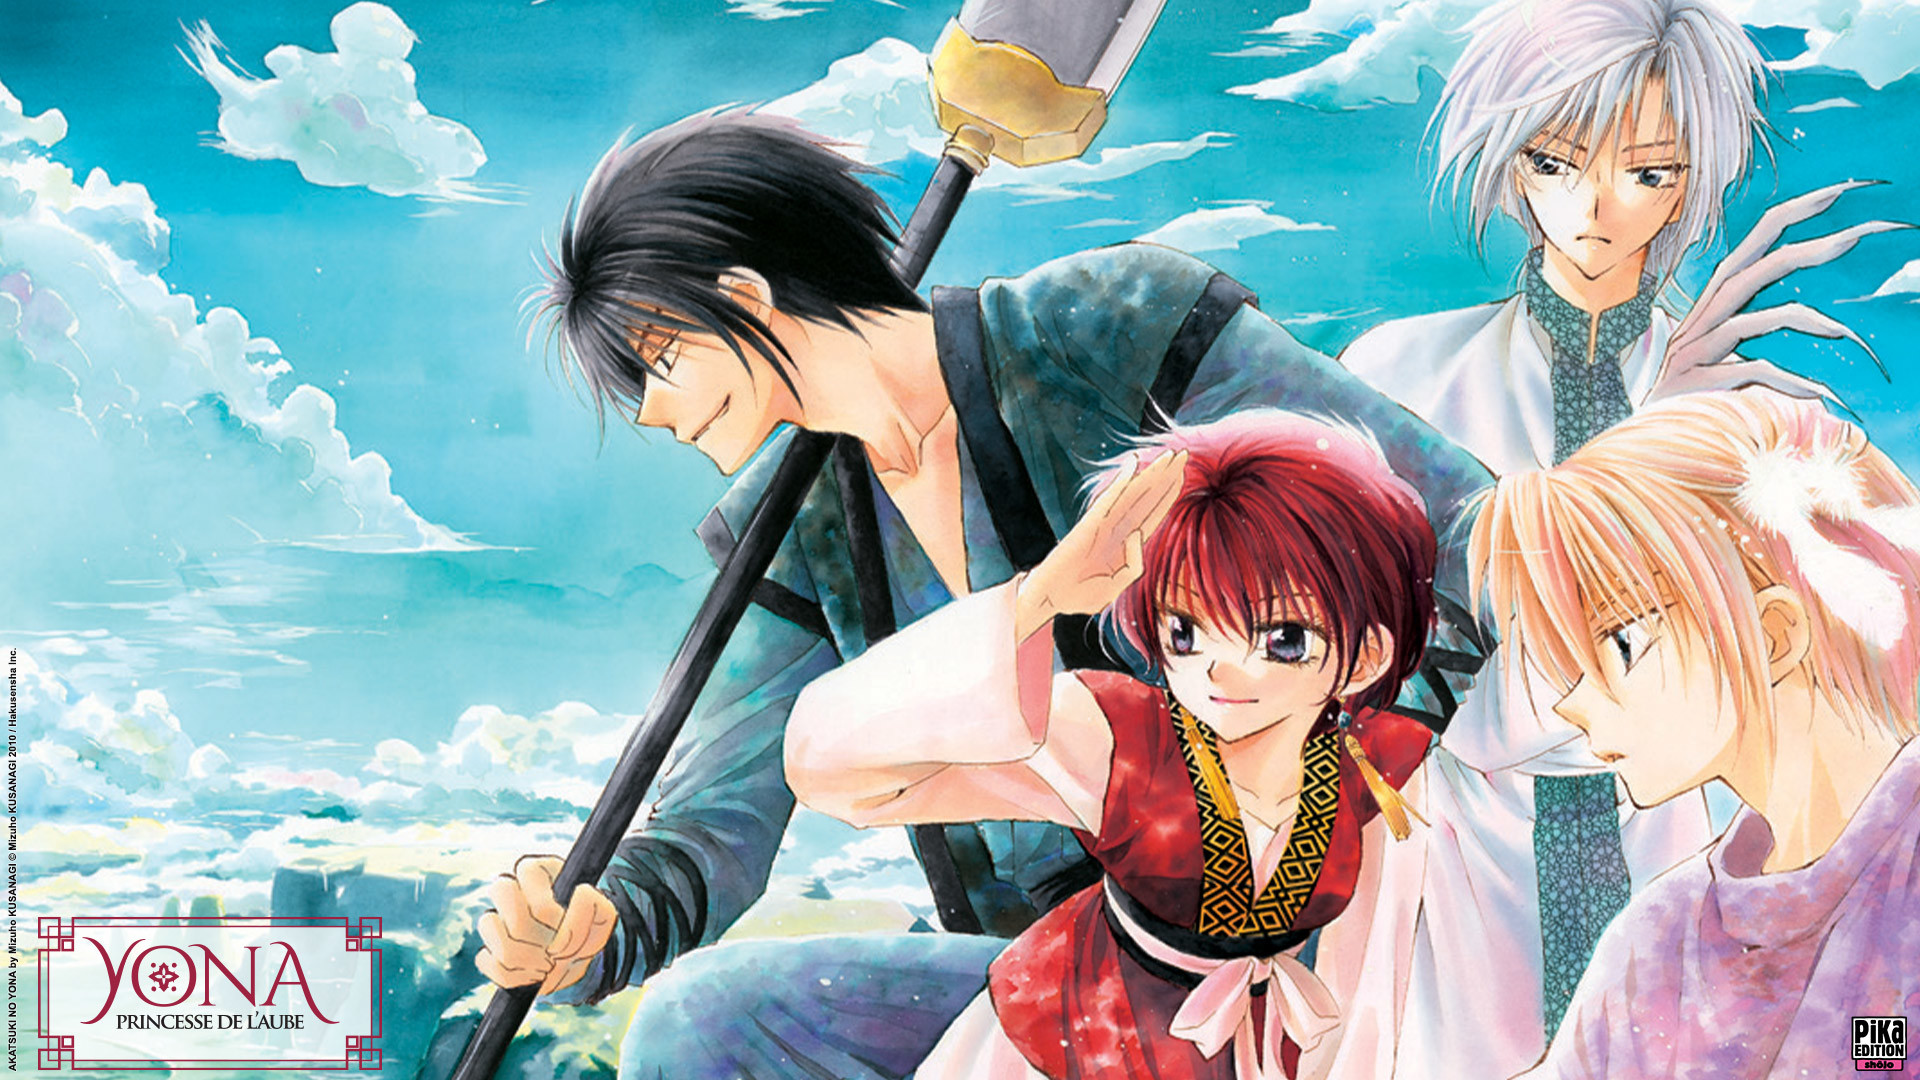 Akatsuki no Yona wallpapers released by the french publisher Pika